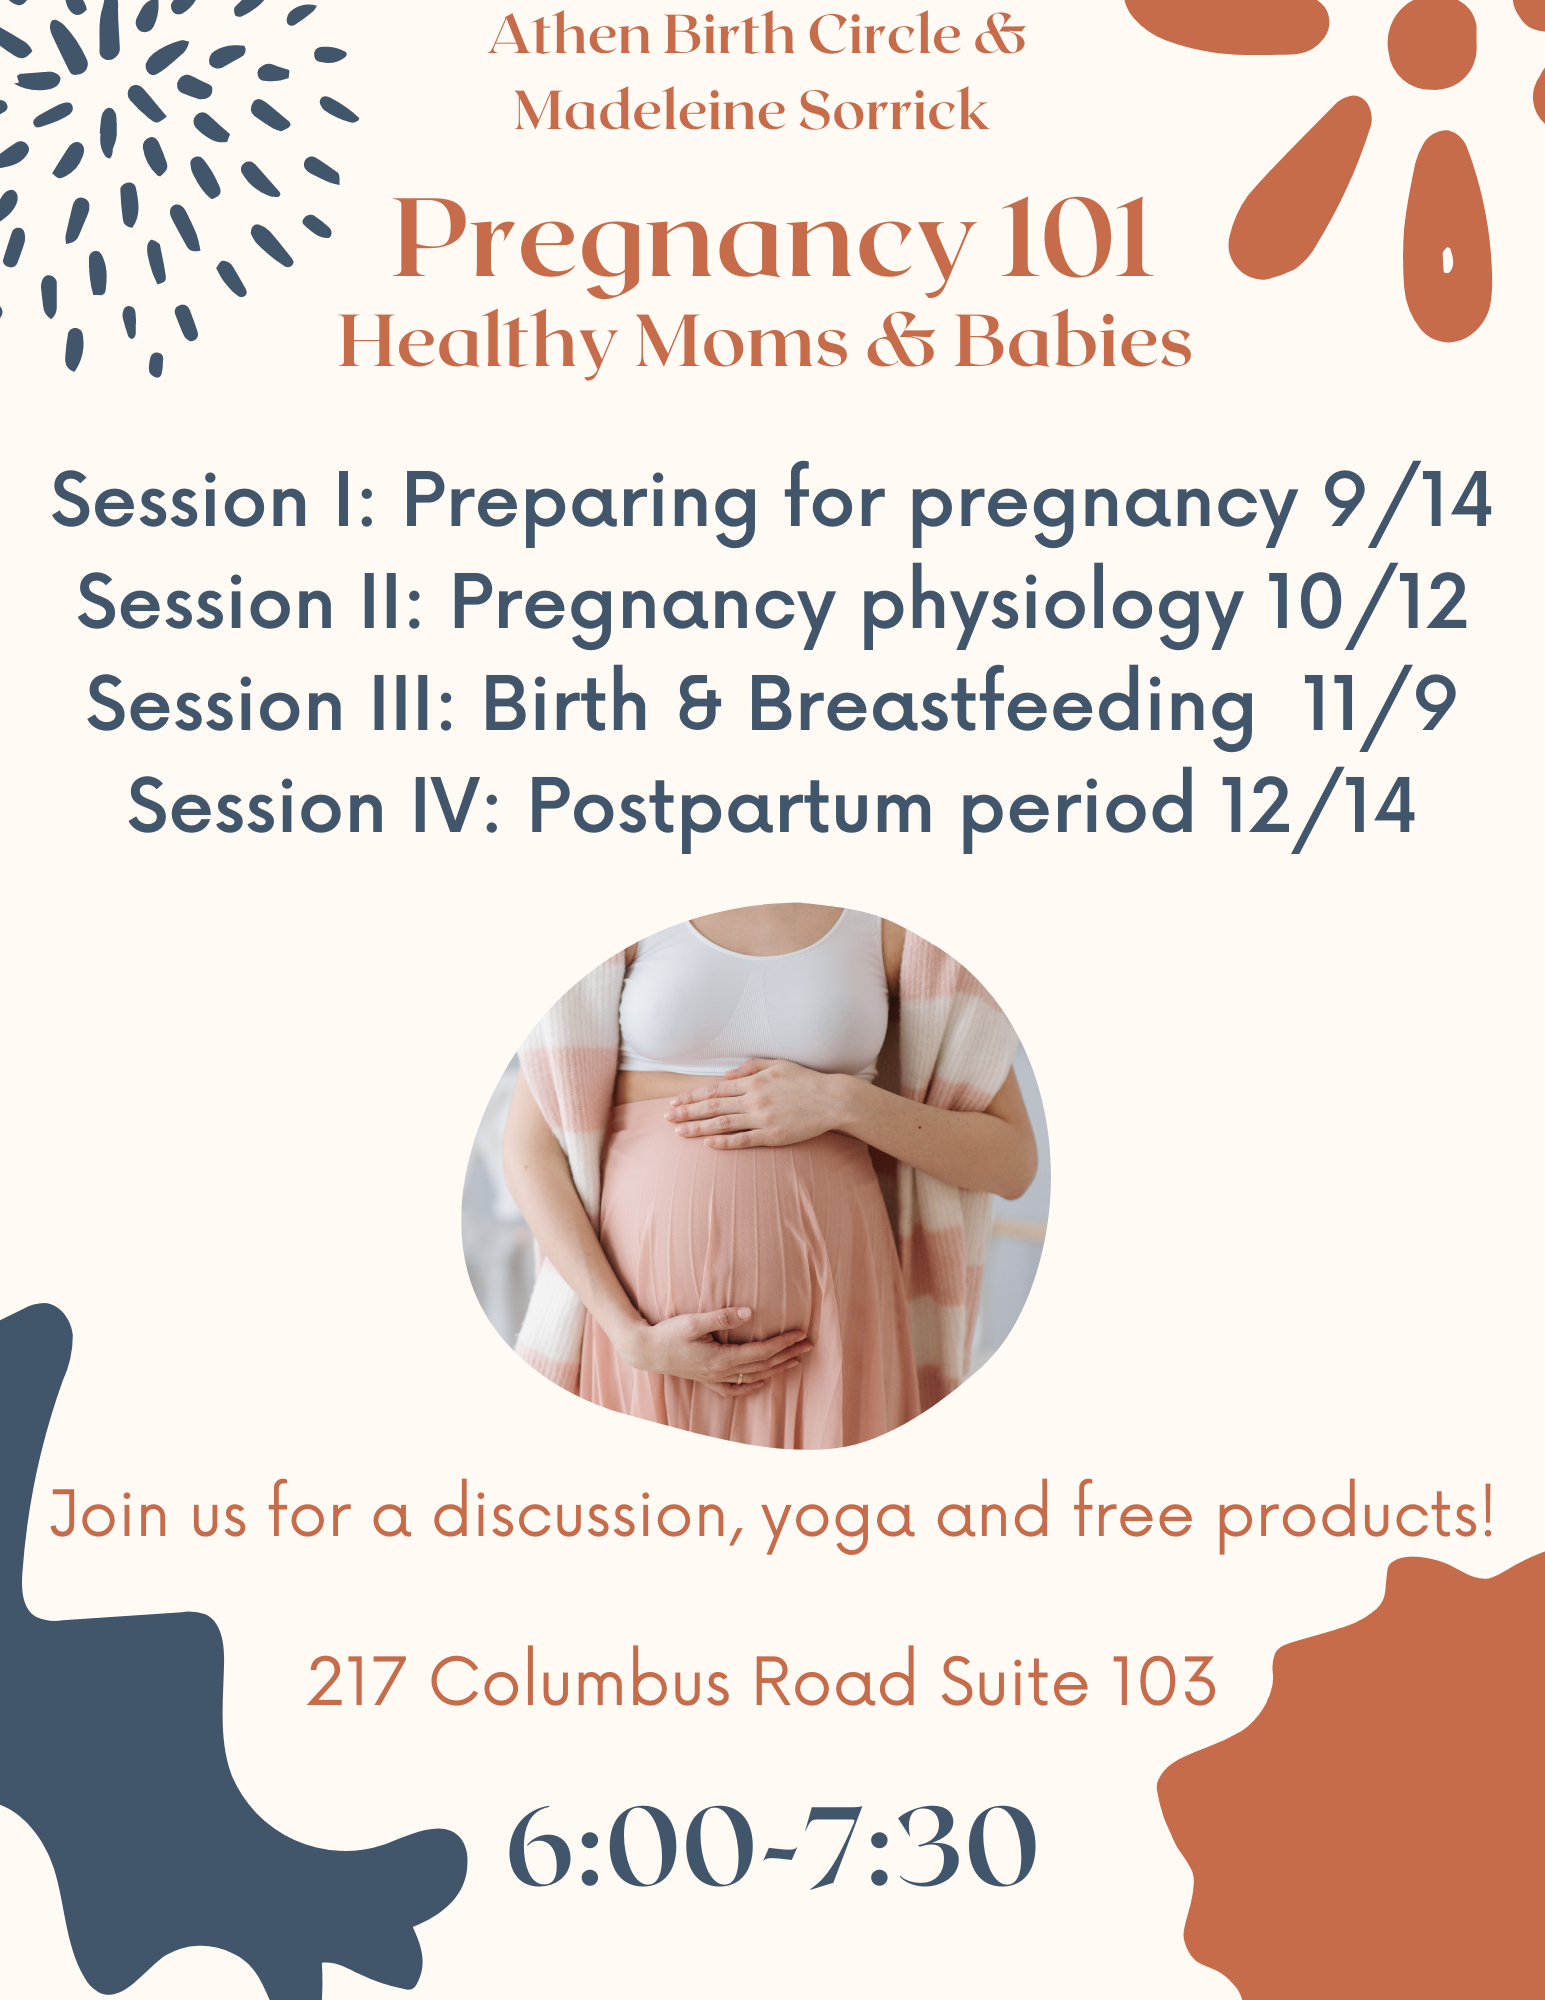 A flyer reading: Athens Birth Circle and Madeleine Serrick Pregnancy 101 Healthy moms and babies. Session 1: Preparing for pregnancy 9/14 Session 2: Pregnancy Physiology: 10/12, Session 3: Birth and Breast feeding 11/09, Session 4: 12/14 Join us for a discussion, yoga, and free products 217 Columbus Rd Suite 103 6 p.m. to 7:30 p.m.